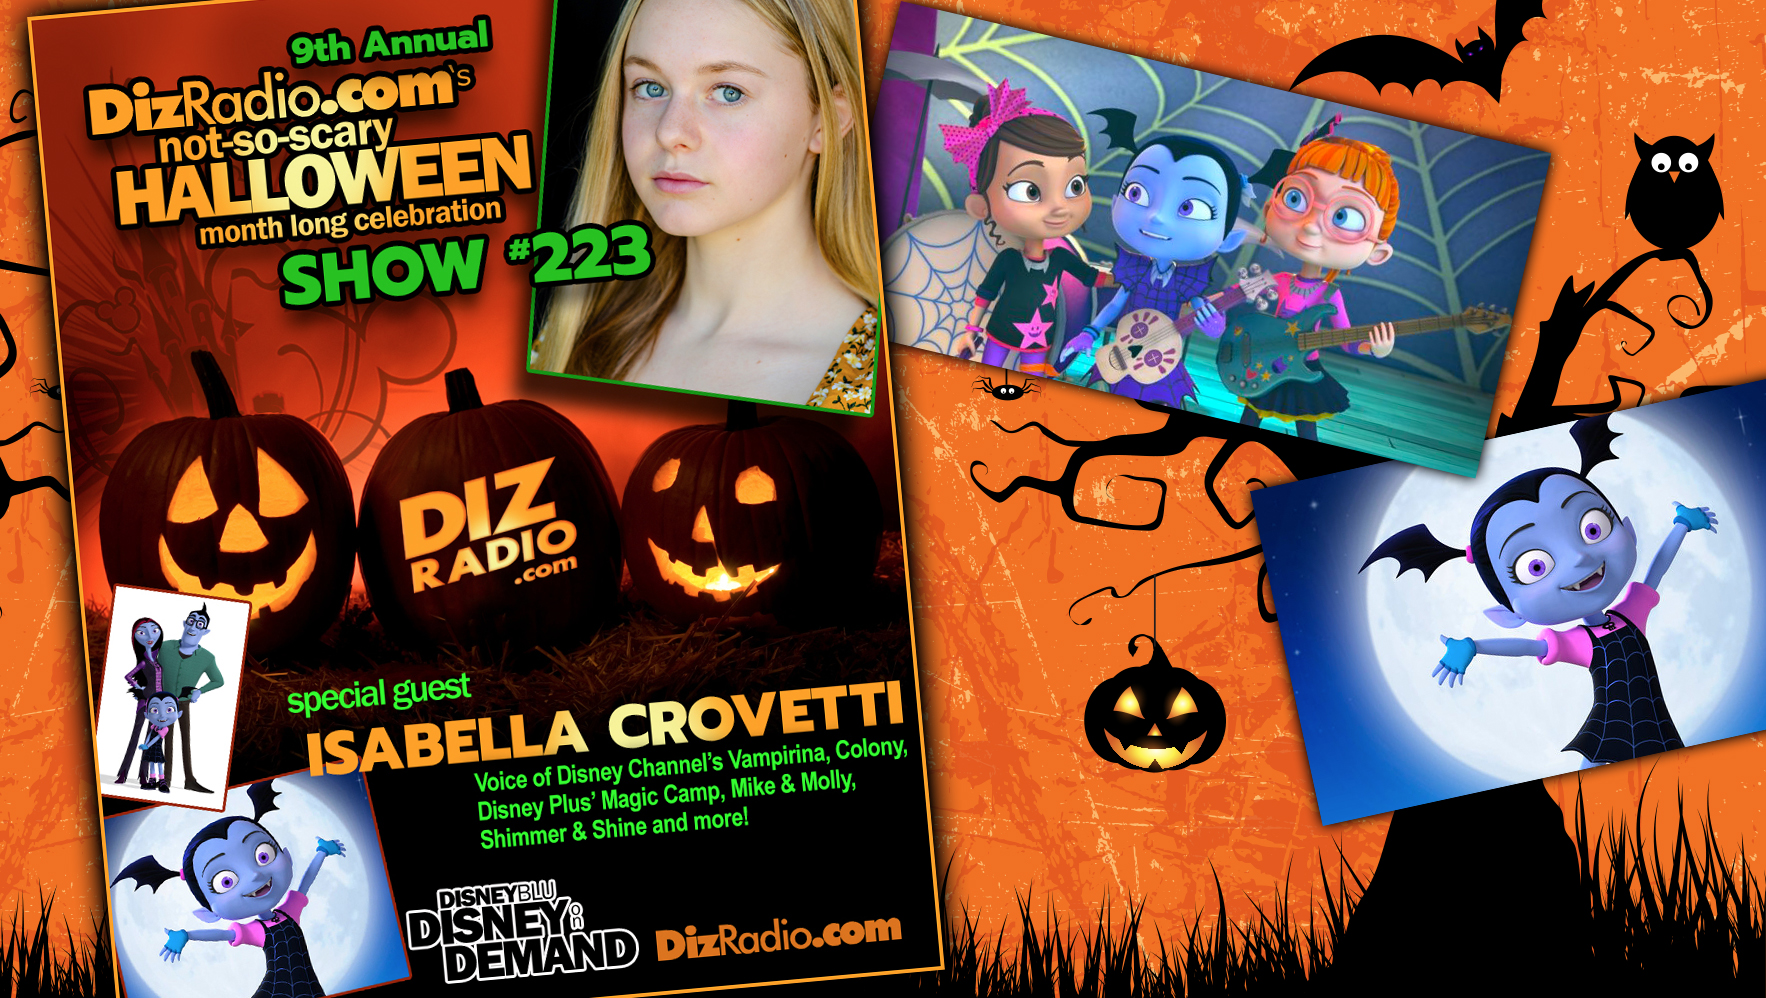 DisneyBlu's DizRadio Disney on Demand Show #223 w/ Special Guest ISABELLA CROVETTI (Voice of Disney Channel's Vampirina, Colony, Disney Plus' Magic Camp, Shimmer and Shine and more!)